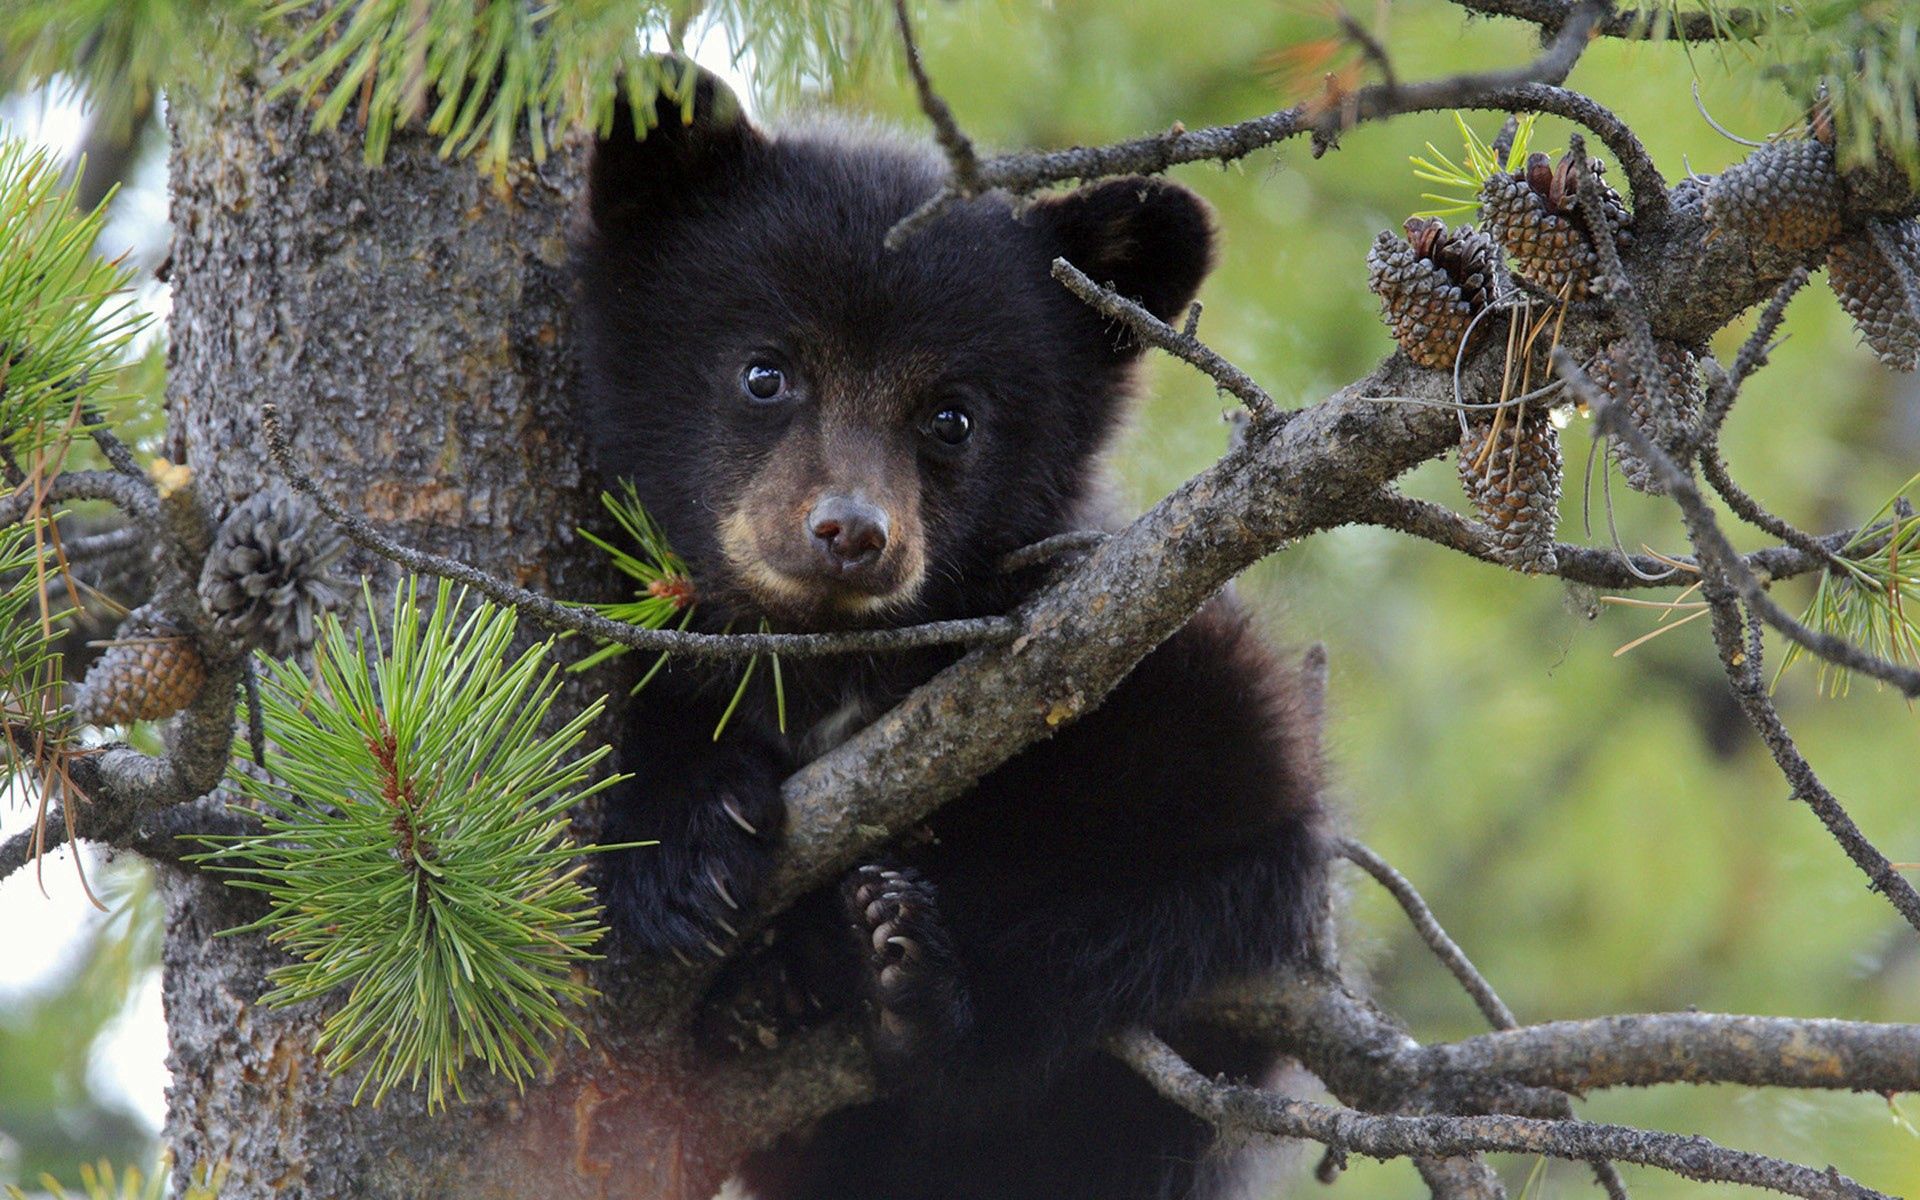 animals, wood, young, tree, branches, bear, spruce, fir, joey iphone wallpaper